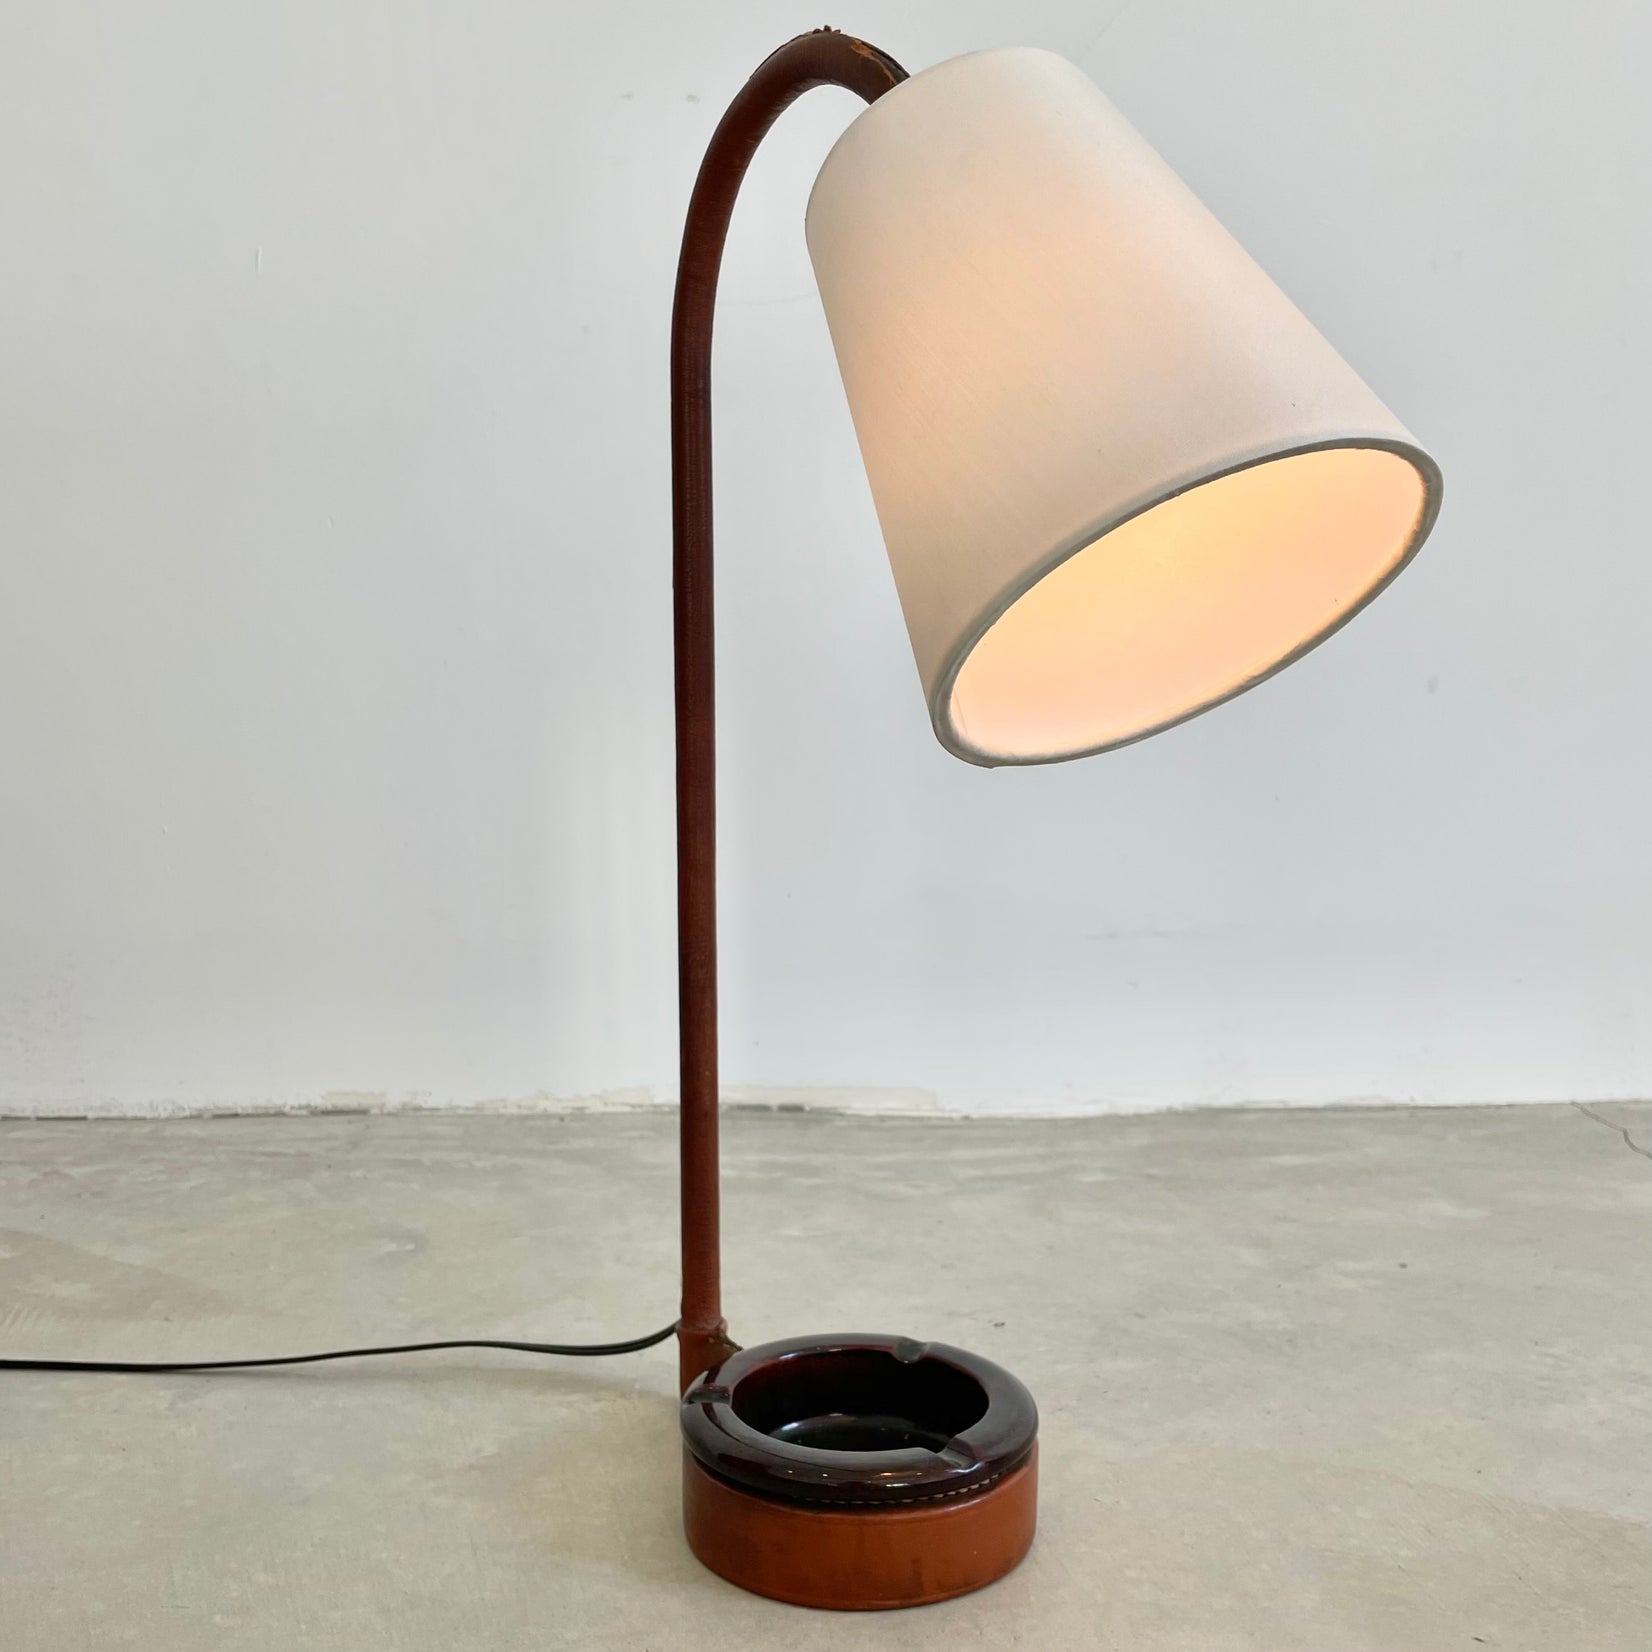 Jacques Adnet Leather Table Lamp with Built-In Catchall, 1950s France